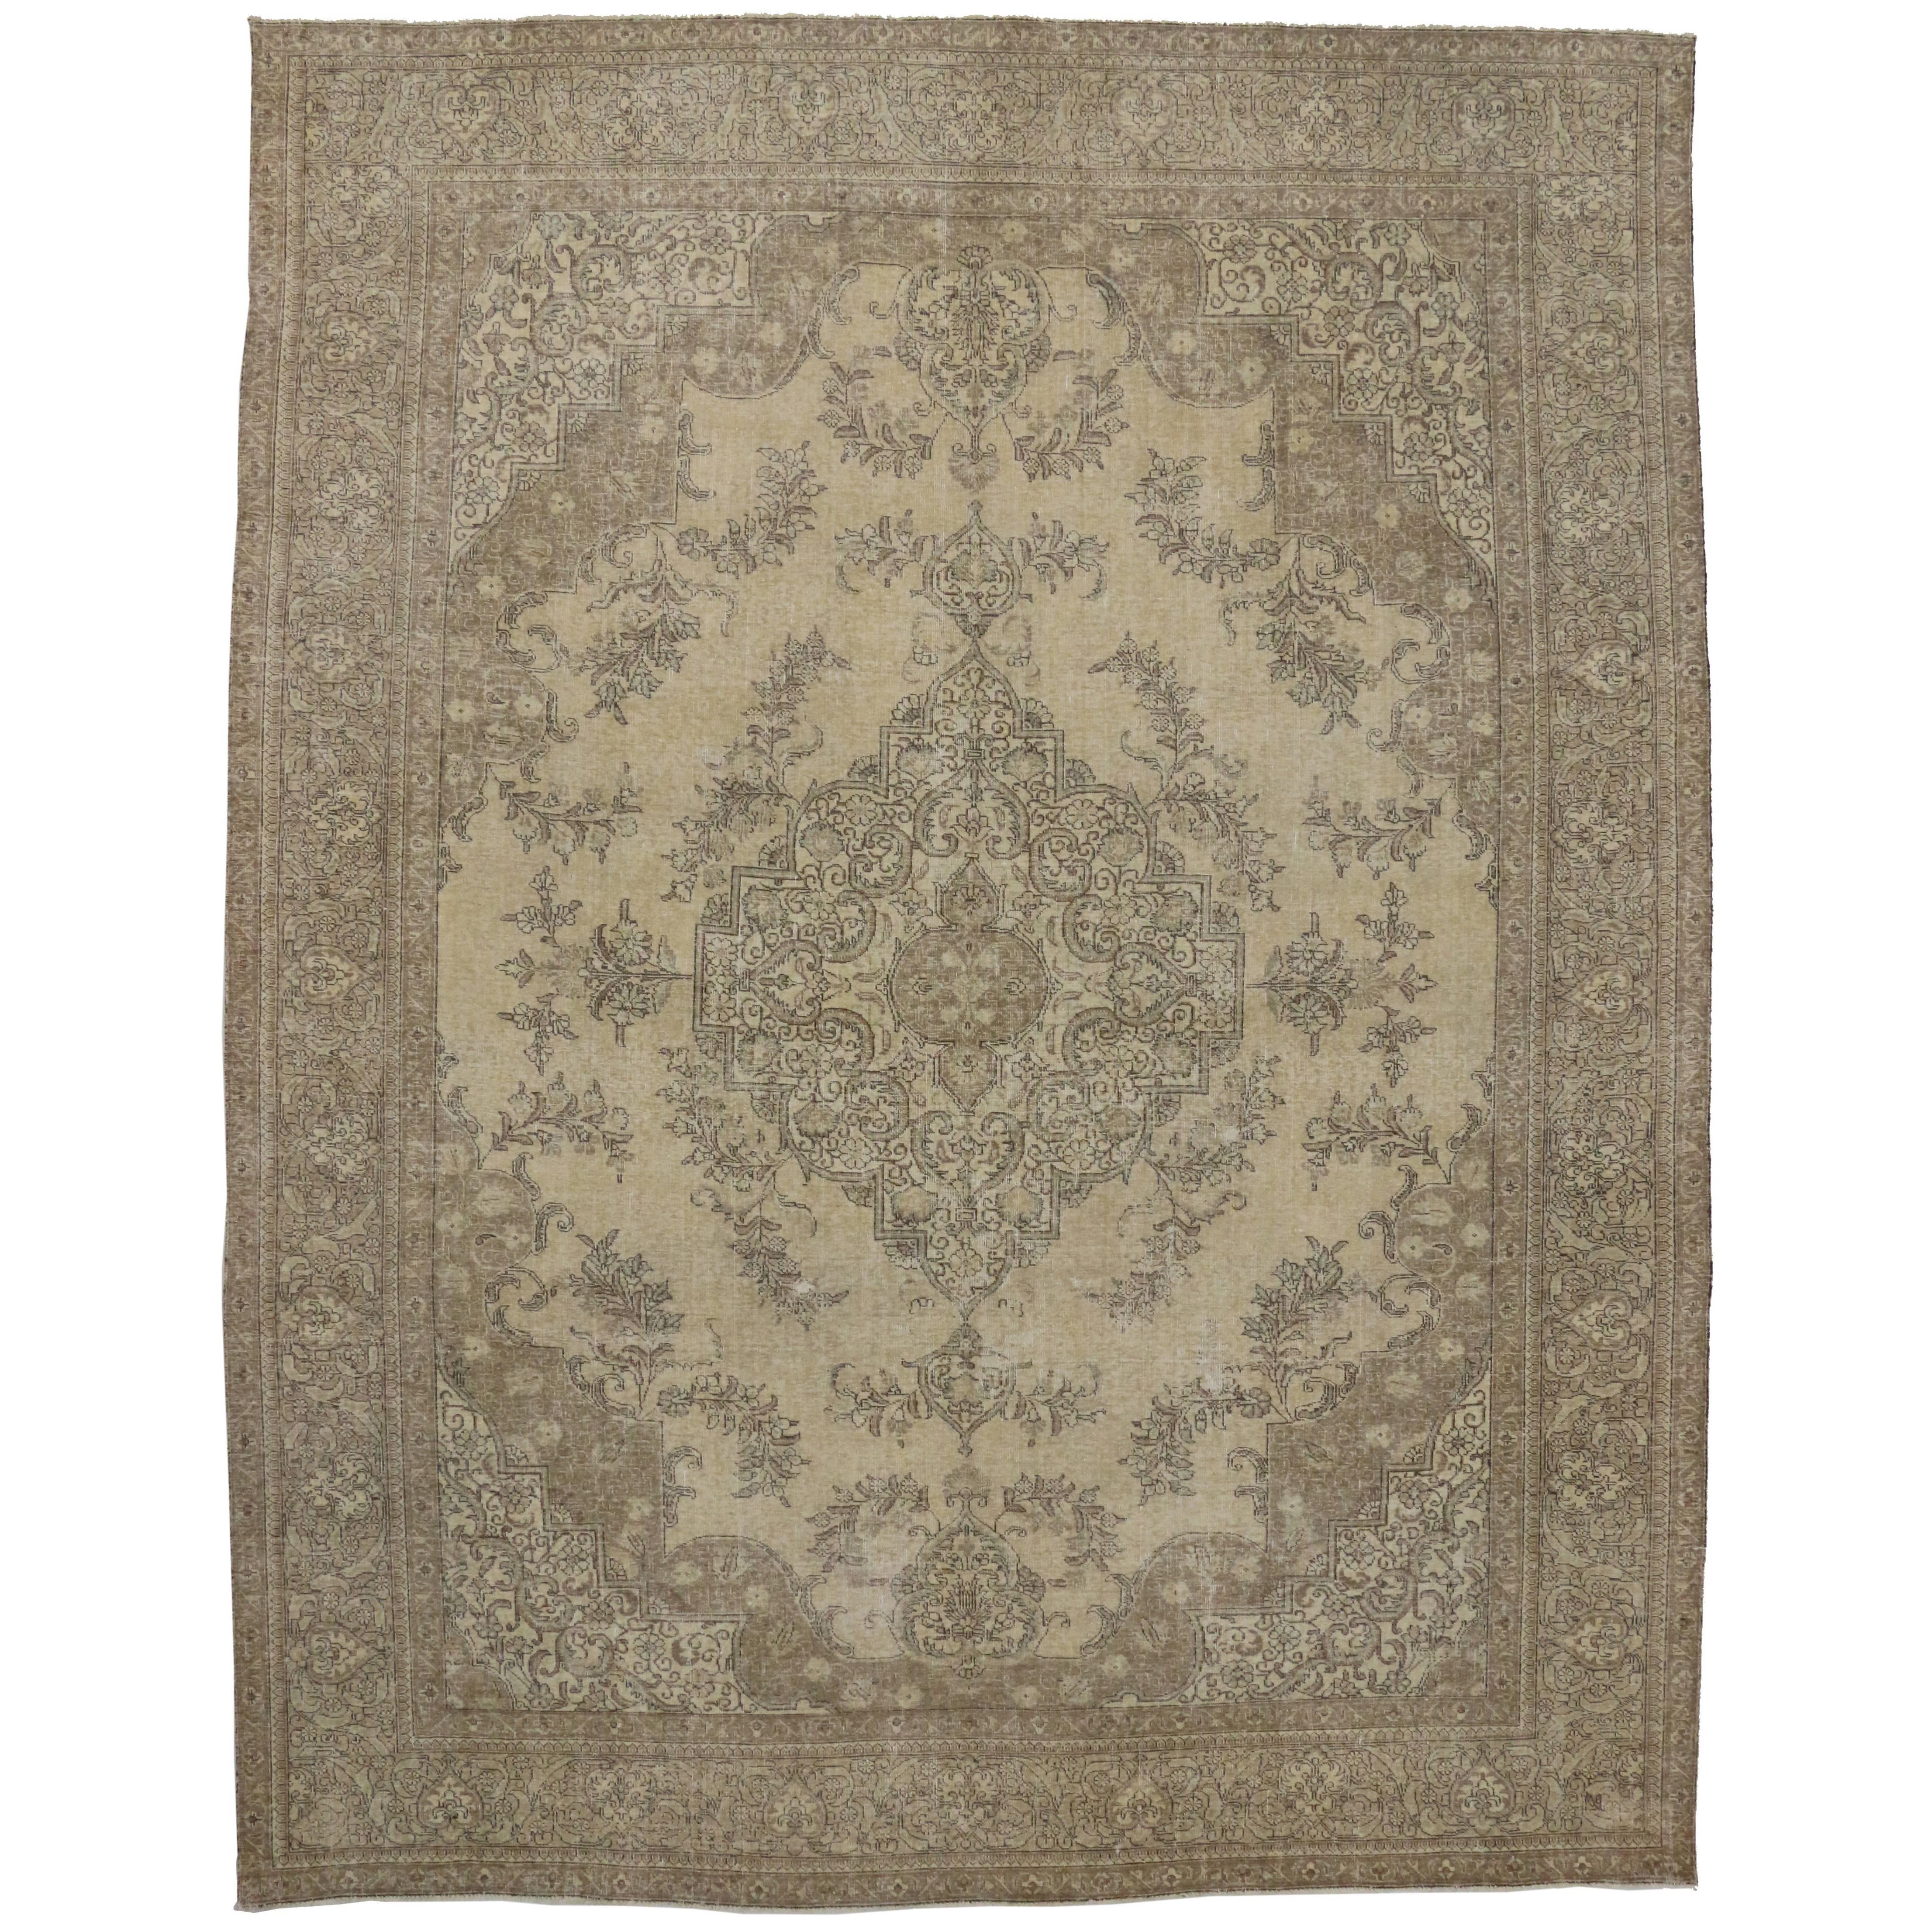 Distressed Vintage Persian Rug with Modern Refined French Industrial Style